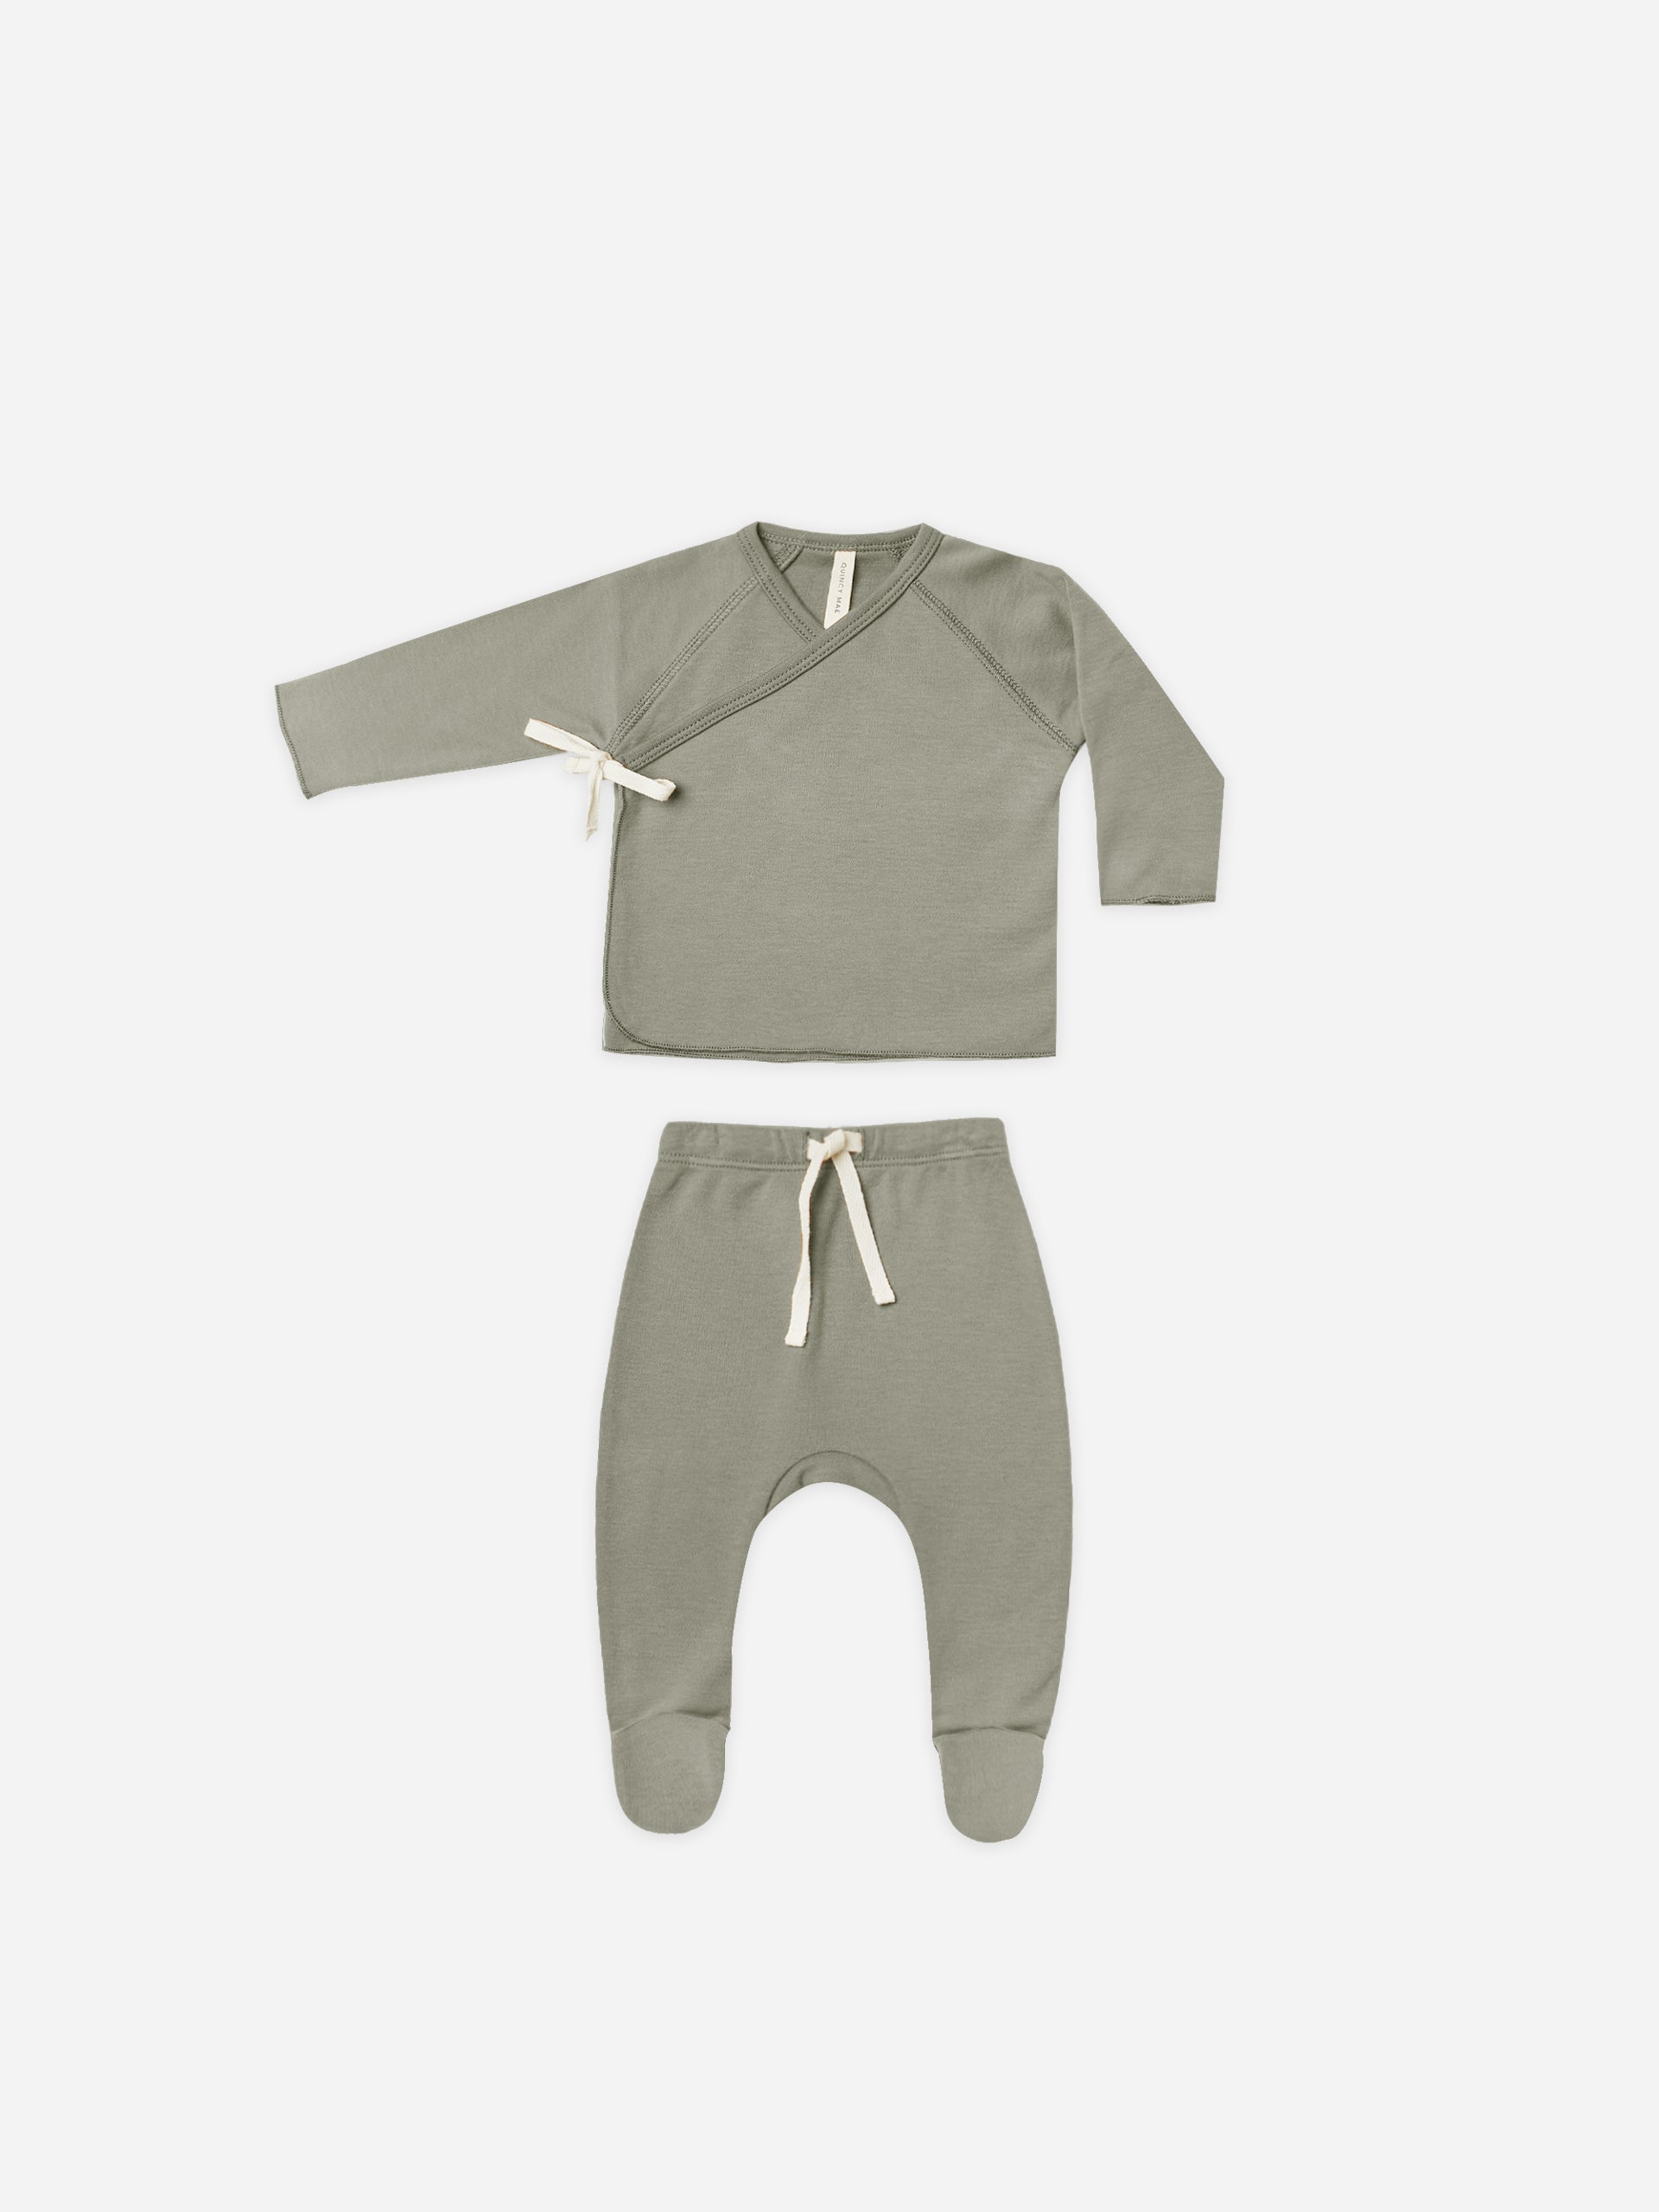 Wrap Top + Footed Pant Set || Basil - Rylee + Cru | Kids Clothes | Trendy Baby Clothes | Modern Infant Outfits |